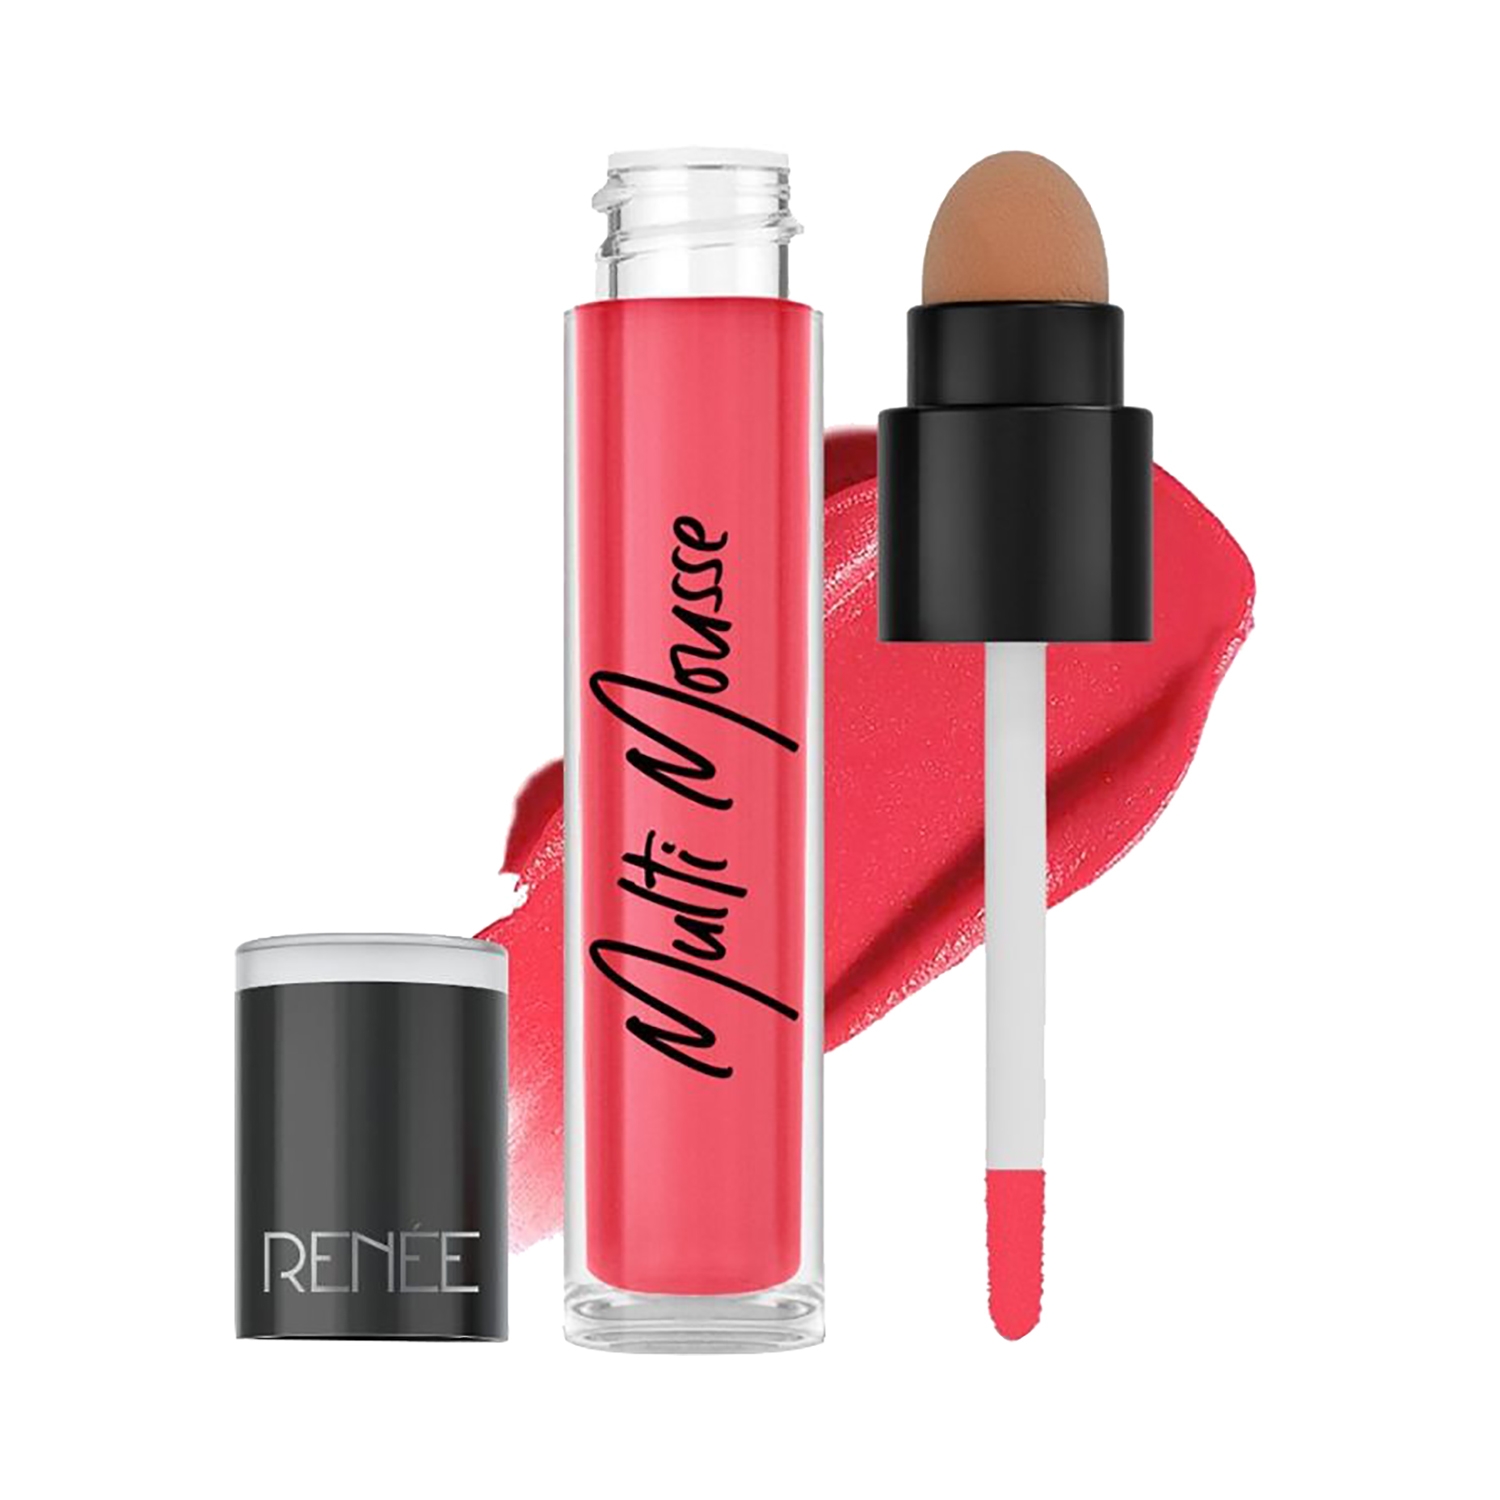 RENEE | RENEE Multi-Mousse Lip Stain - MO 05 Pink Pudding (5g)